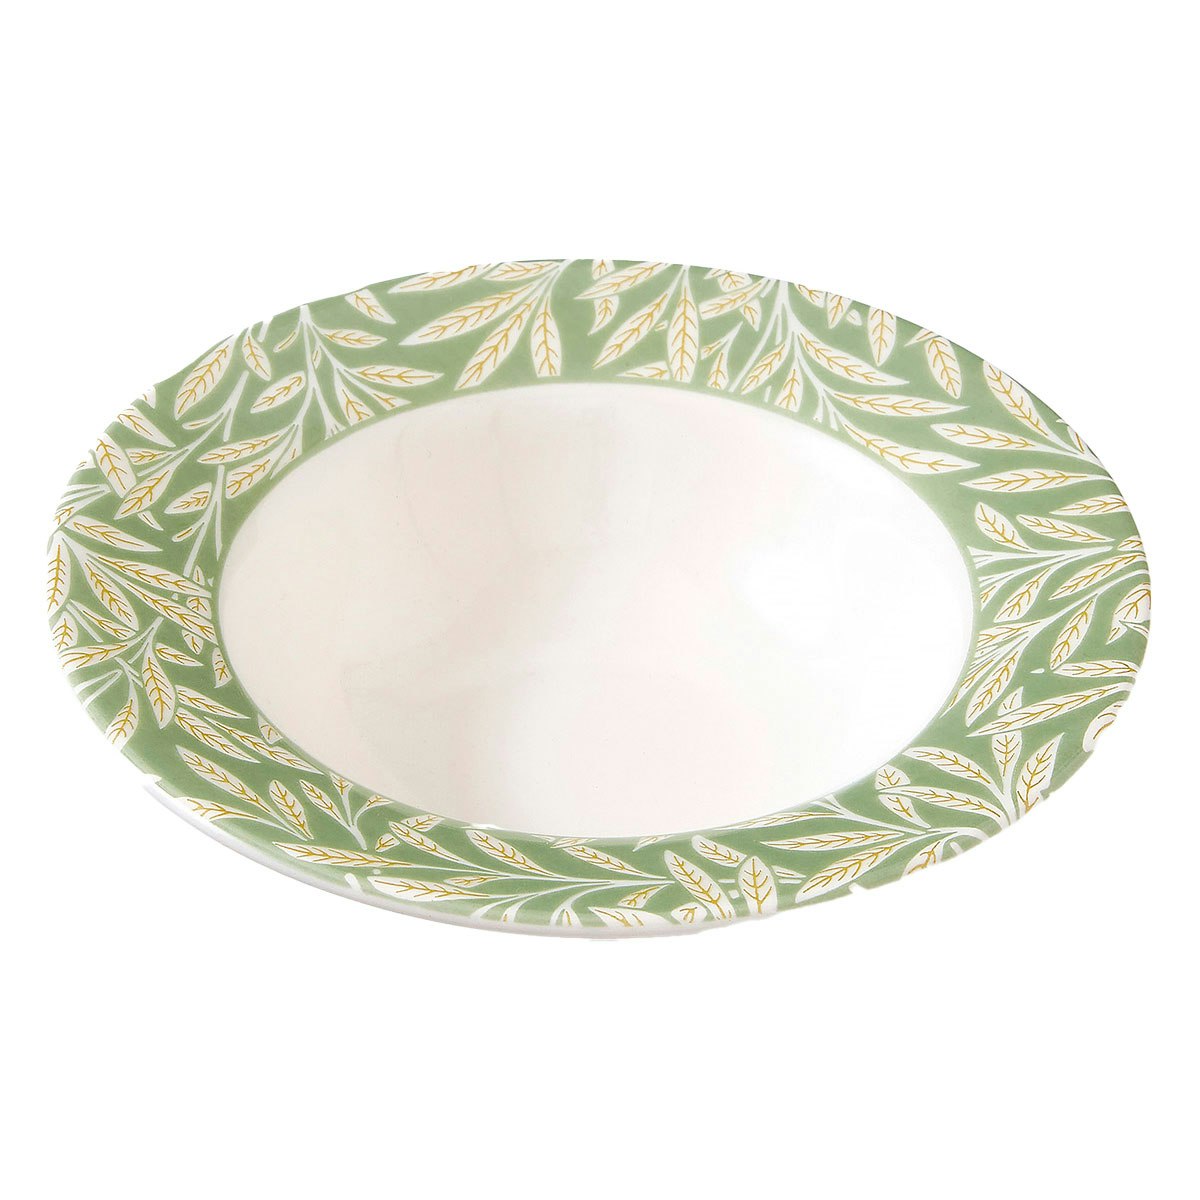 Morris & Co Cereal Bowl 19 cm, Willow